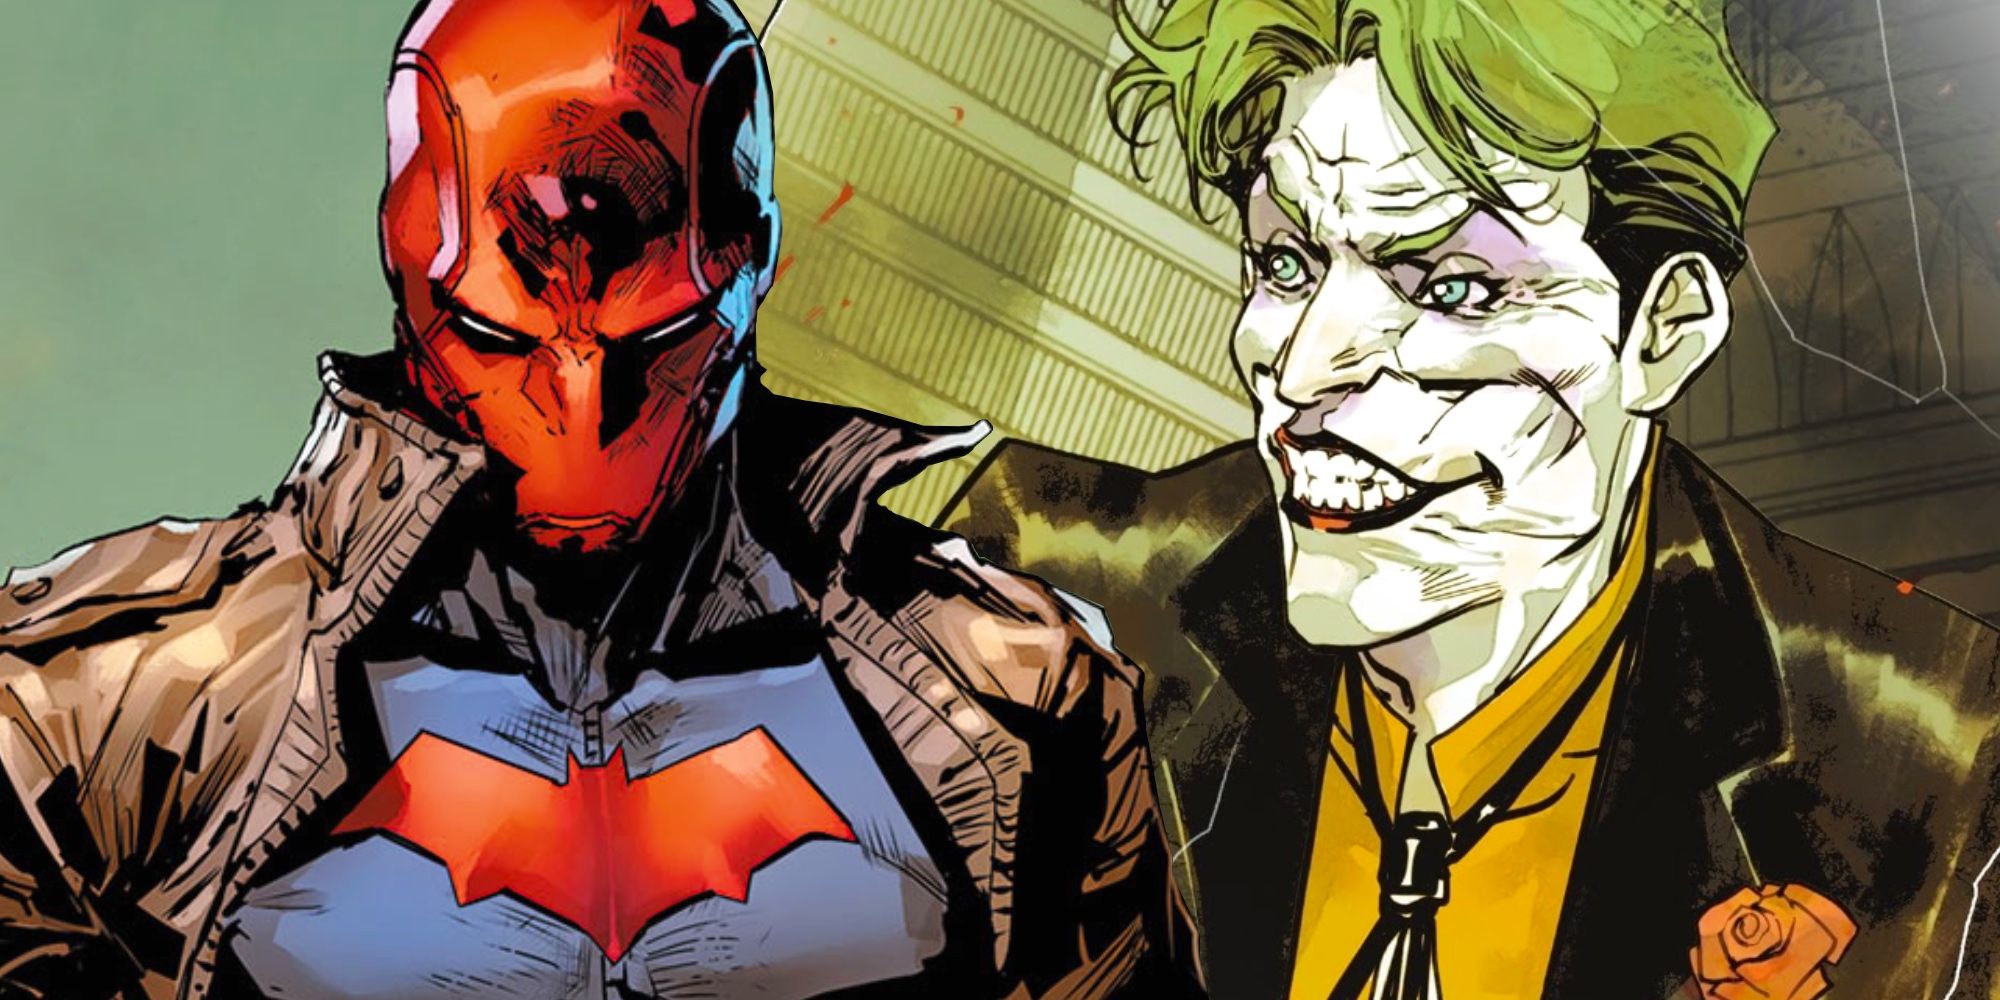 Red Hood and Joker in DC Comics standing next to each other.